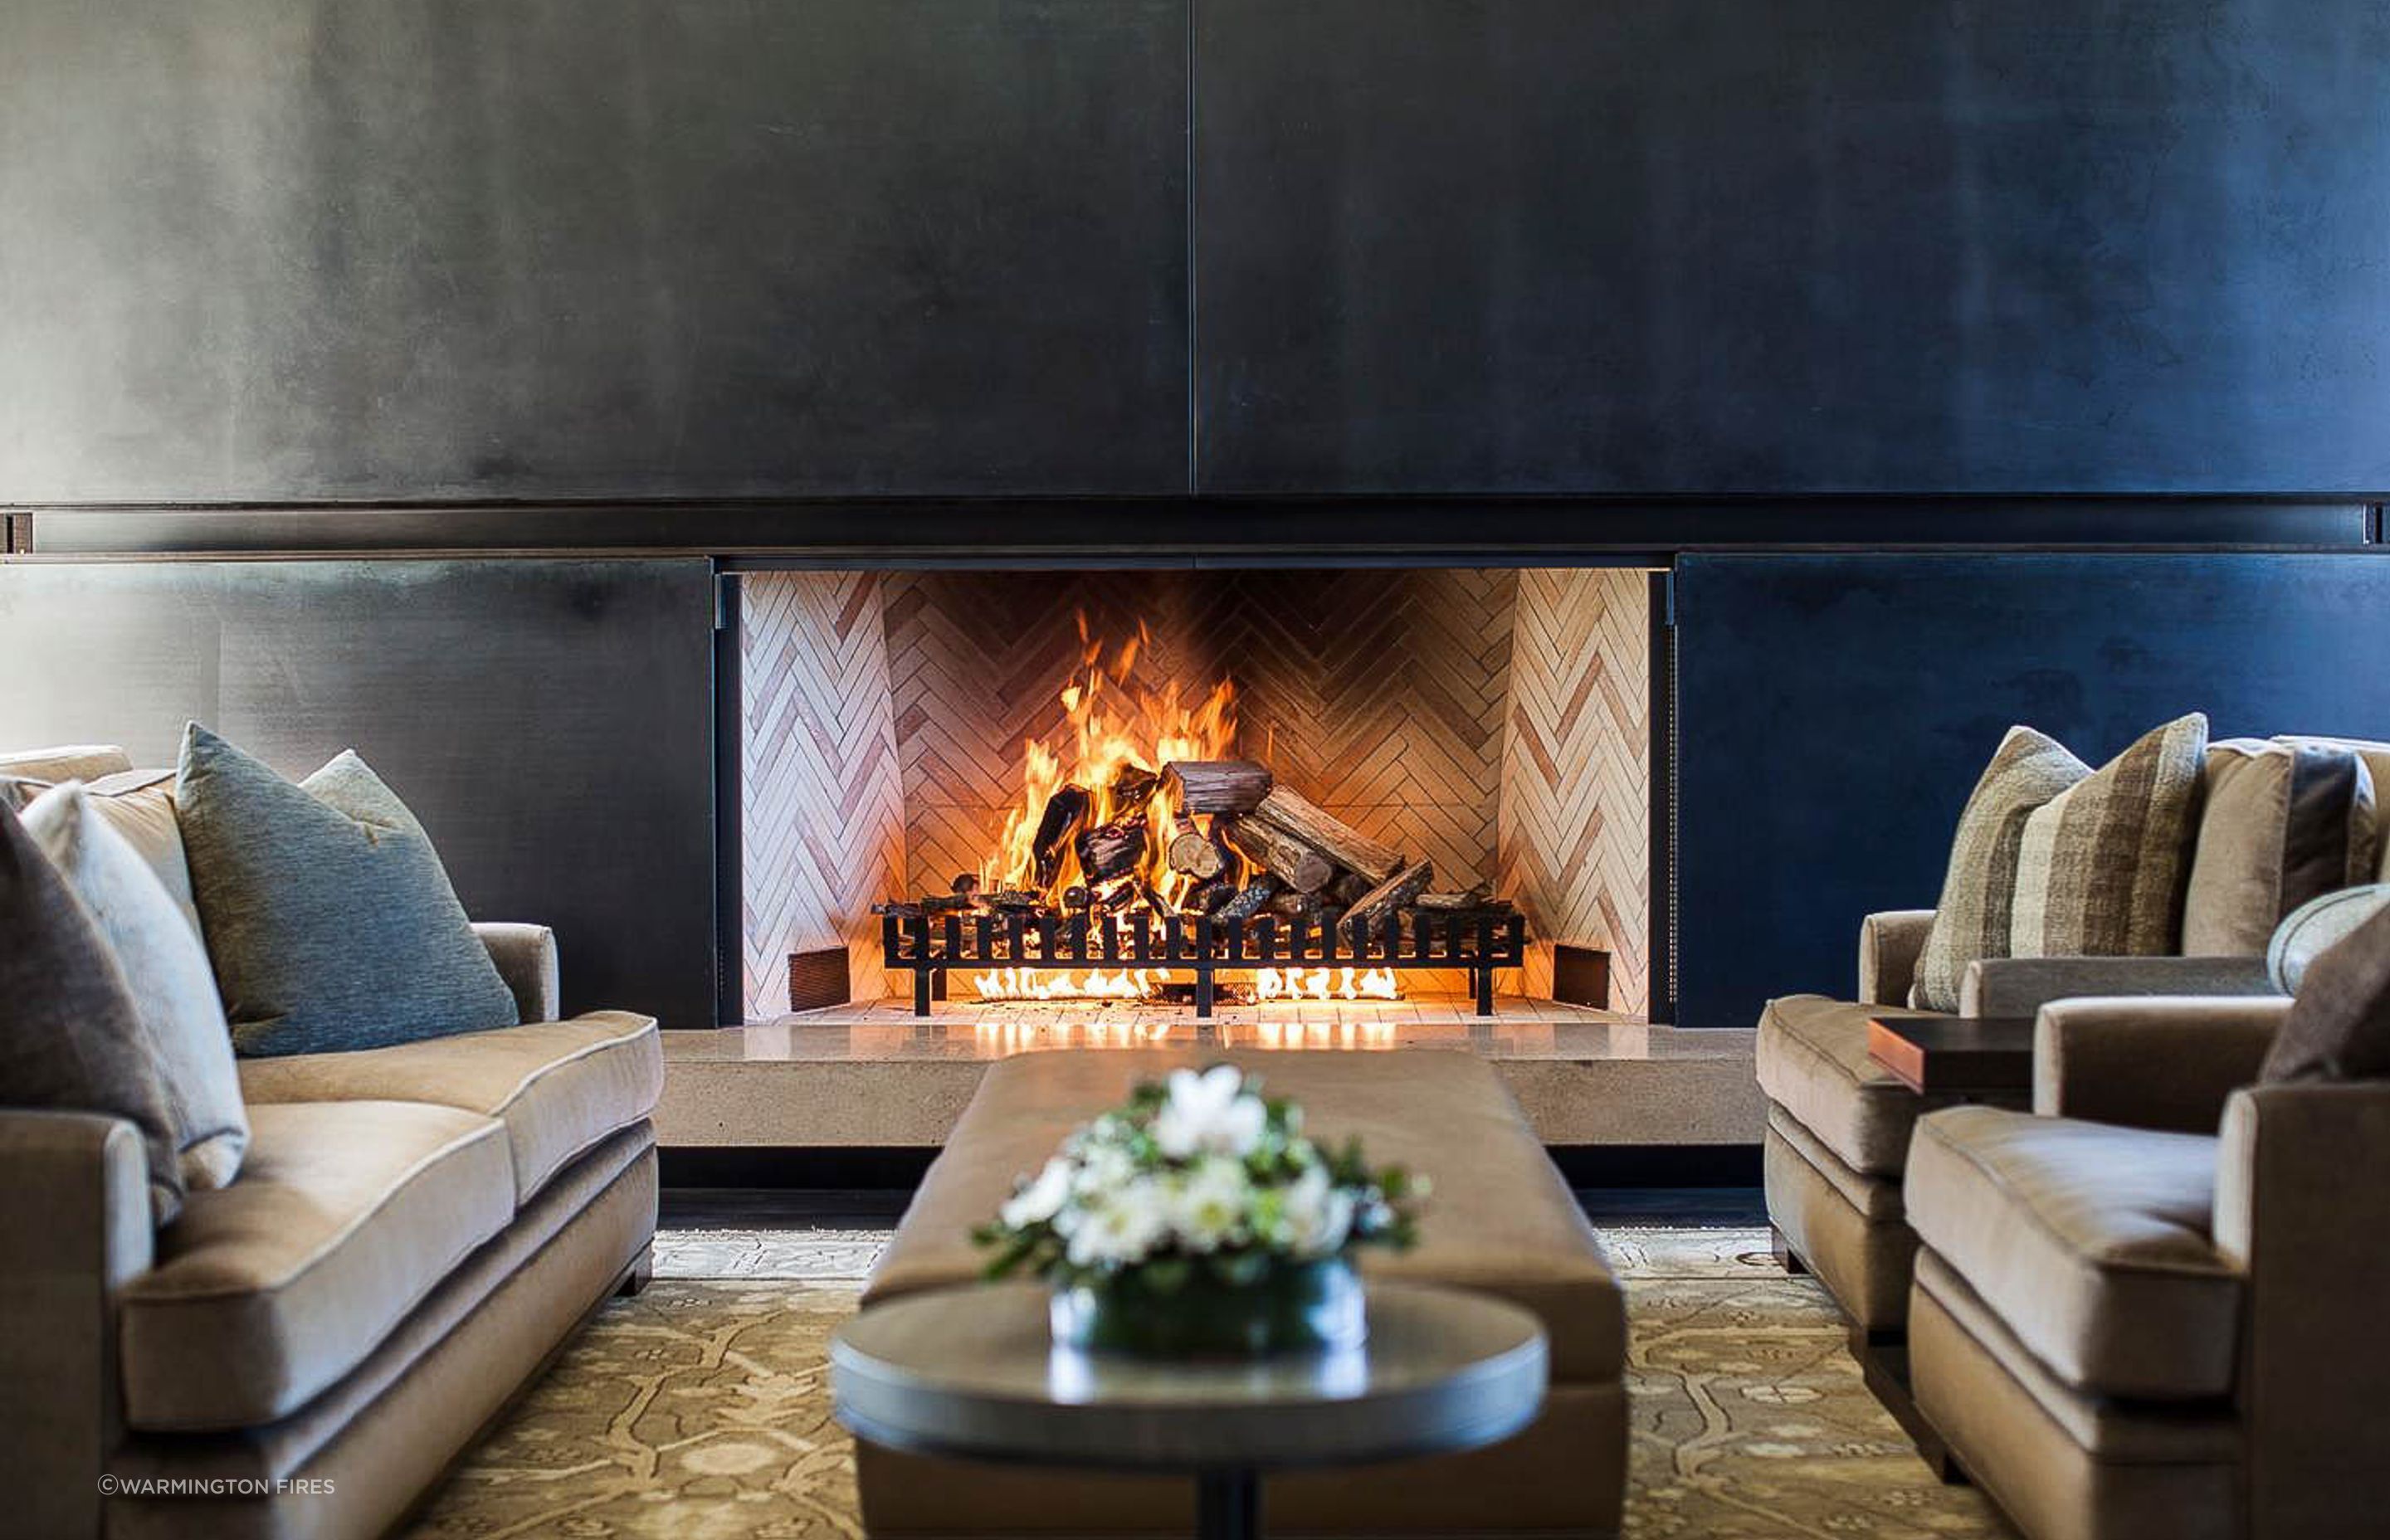 Lavish and luxurious options like this Indoor Wood Traditional Fire only ever come from the very best professionals